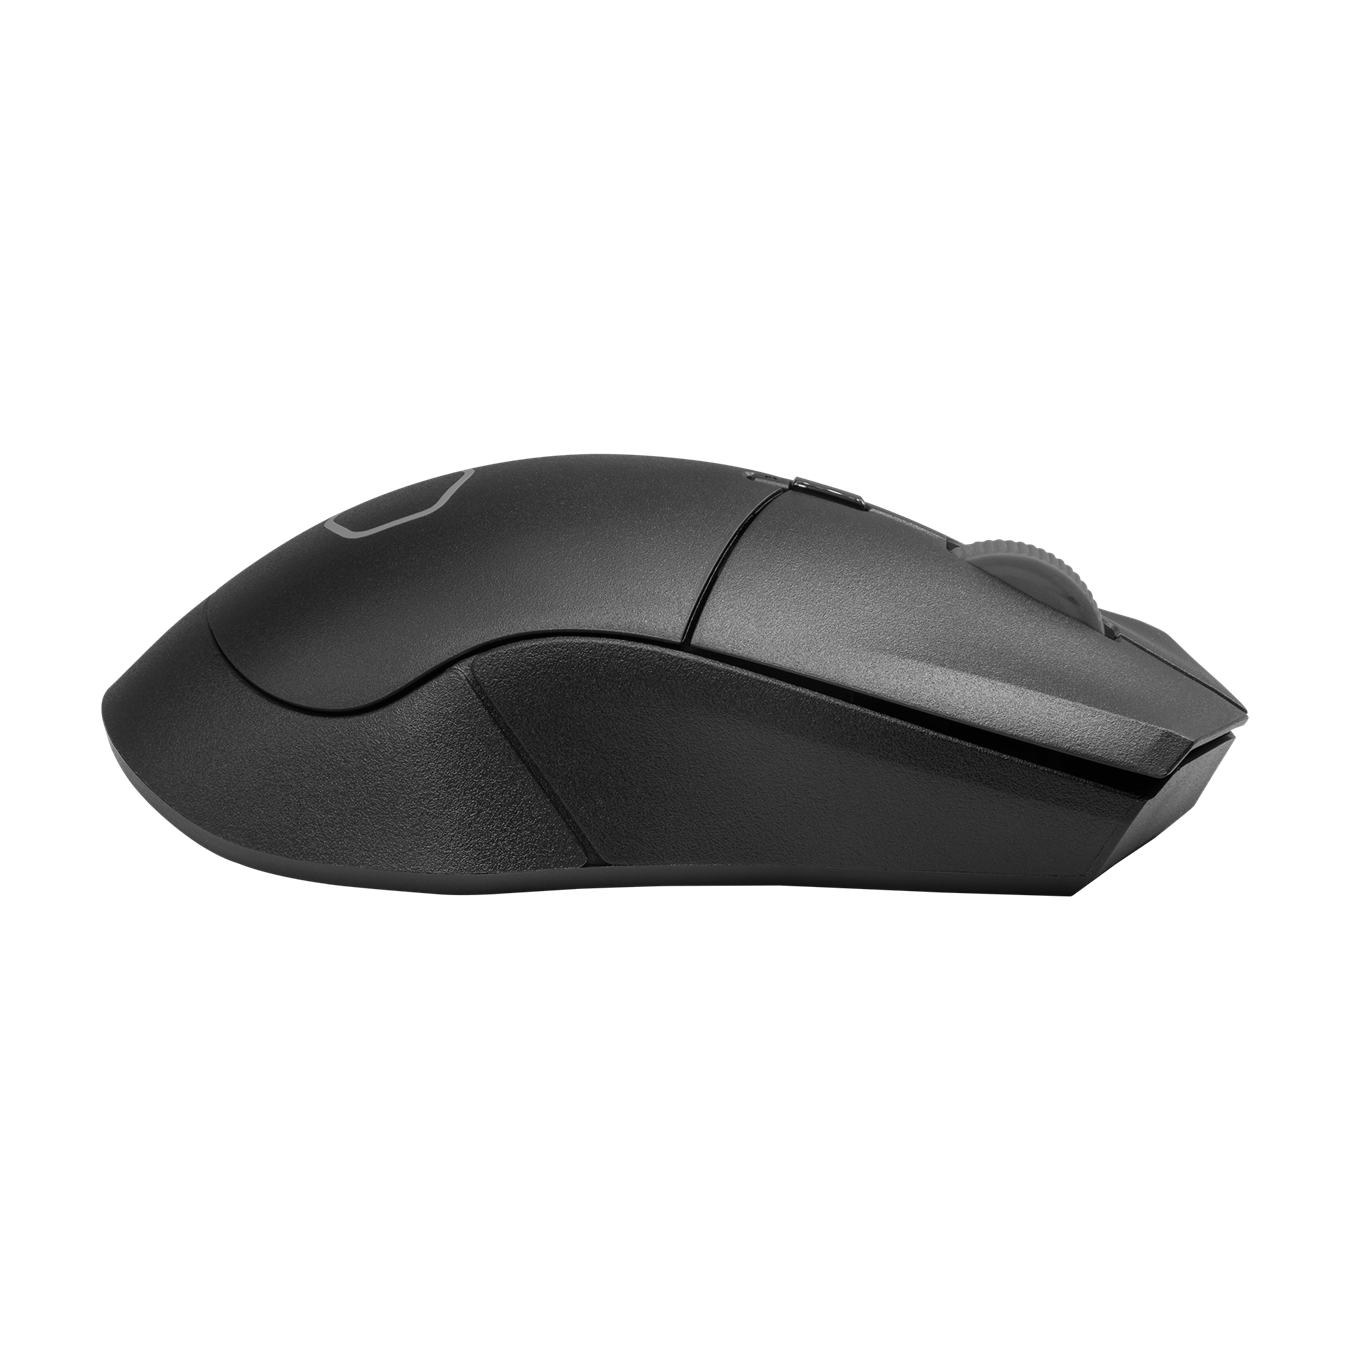 MM311 Wireless Mouse - New-and-improved feet made with PTFE material for low friction and high durability, which provides a smooth, fast glide with maximum responsiveness.